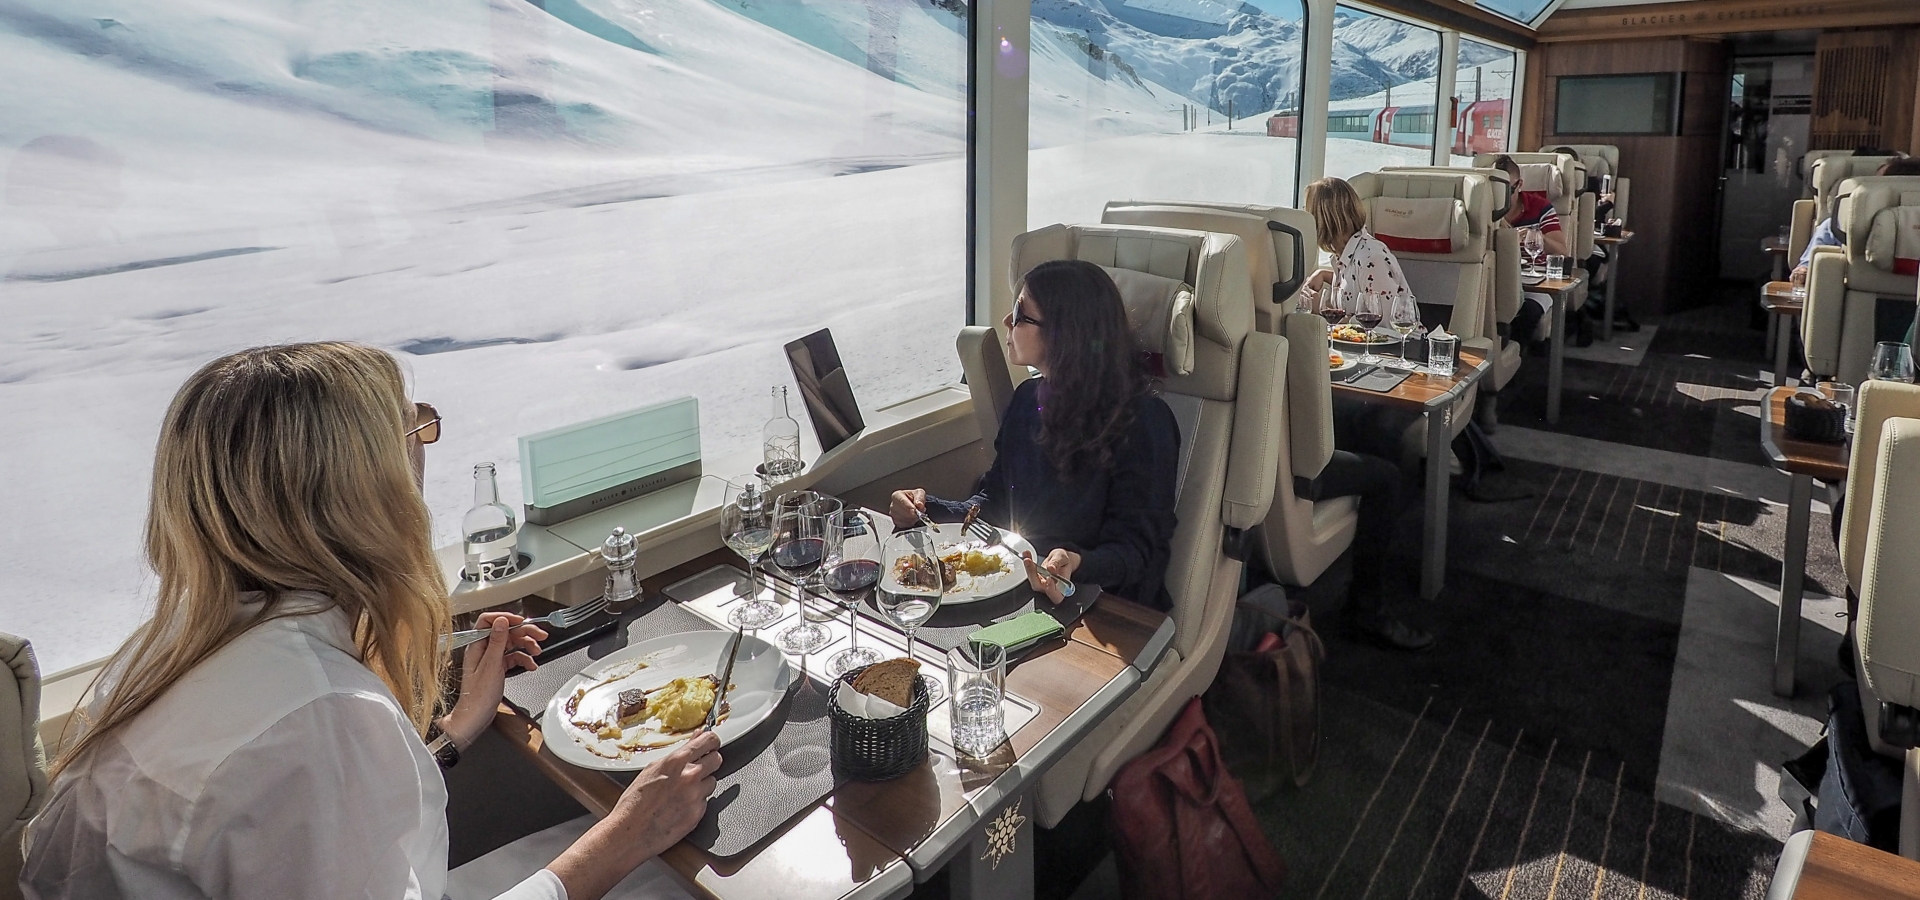 Train travellers look out of the window and the snowy Alpine scenery